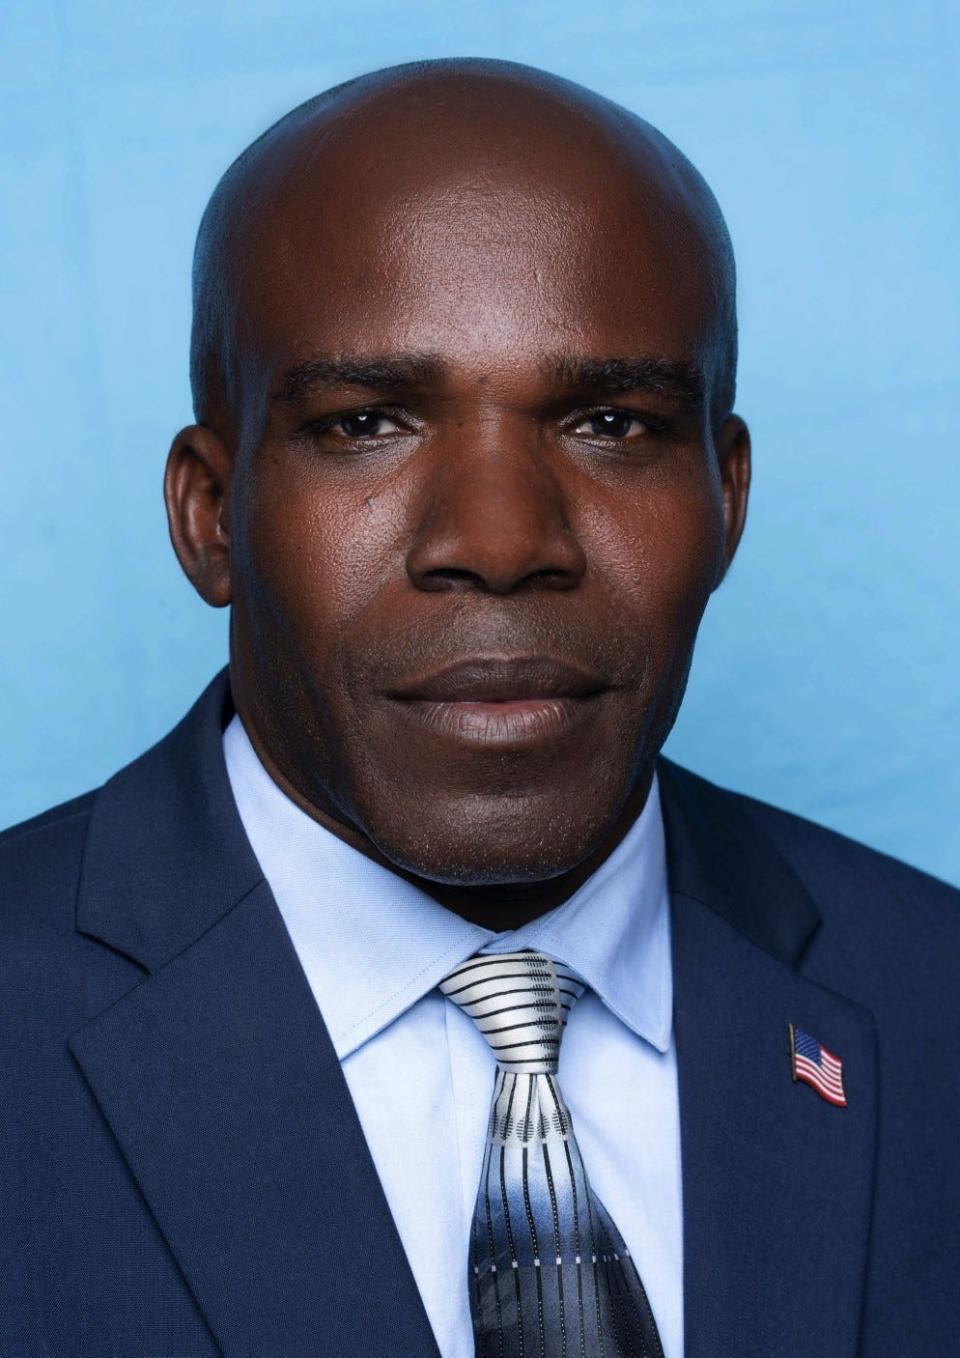 Arthur Boyer, 52, an educator in Immokalee, is a District 5 candidate for the Collier County School Board in the Aug. 23, 2022, primary.